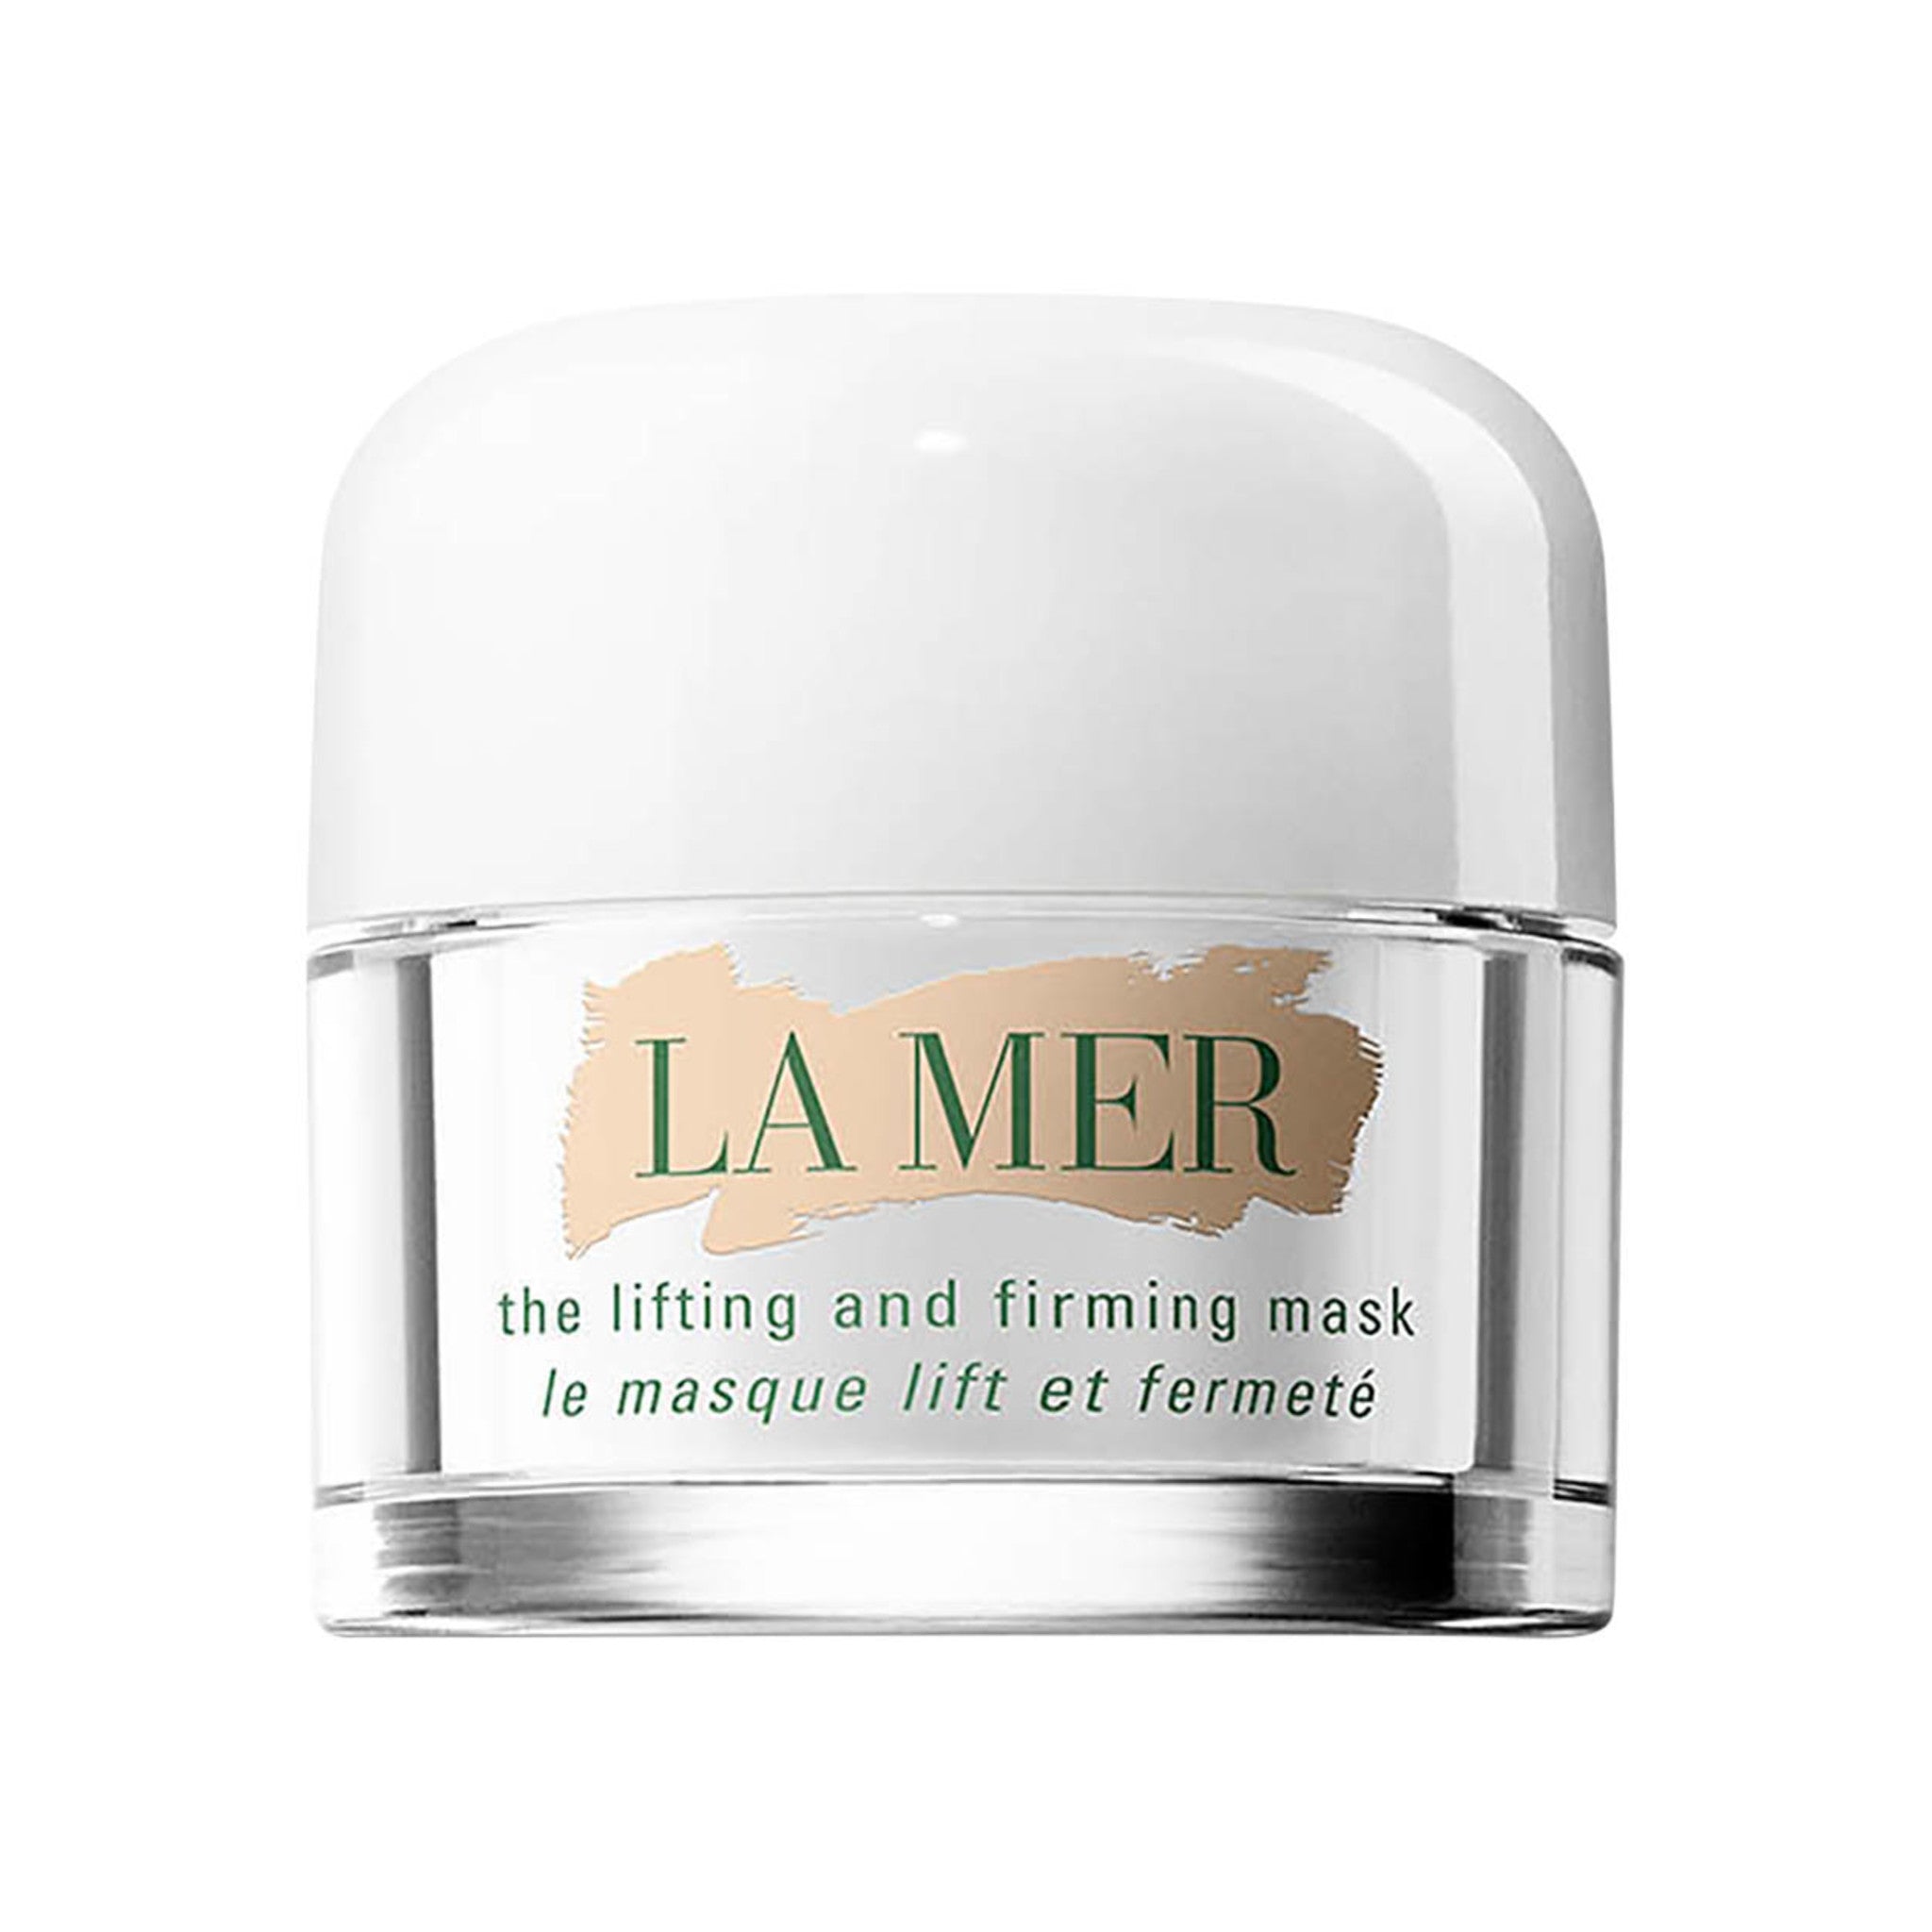 La Mer The Lifting and Firming Mask Size variant: 15 ML main image.